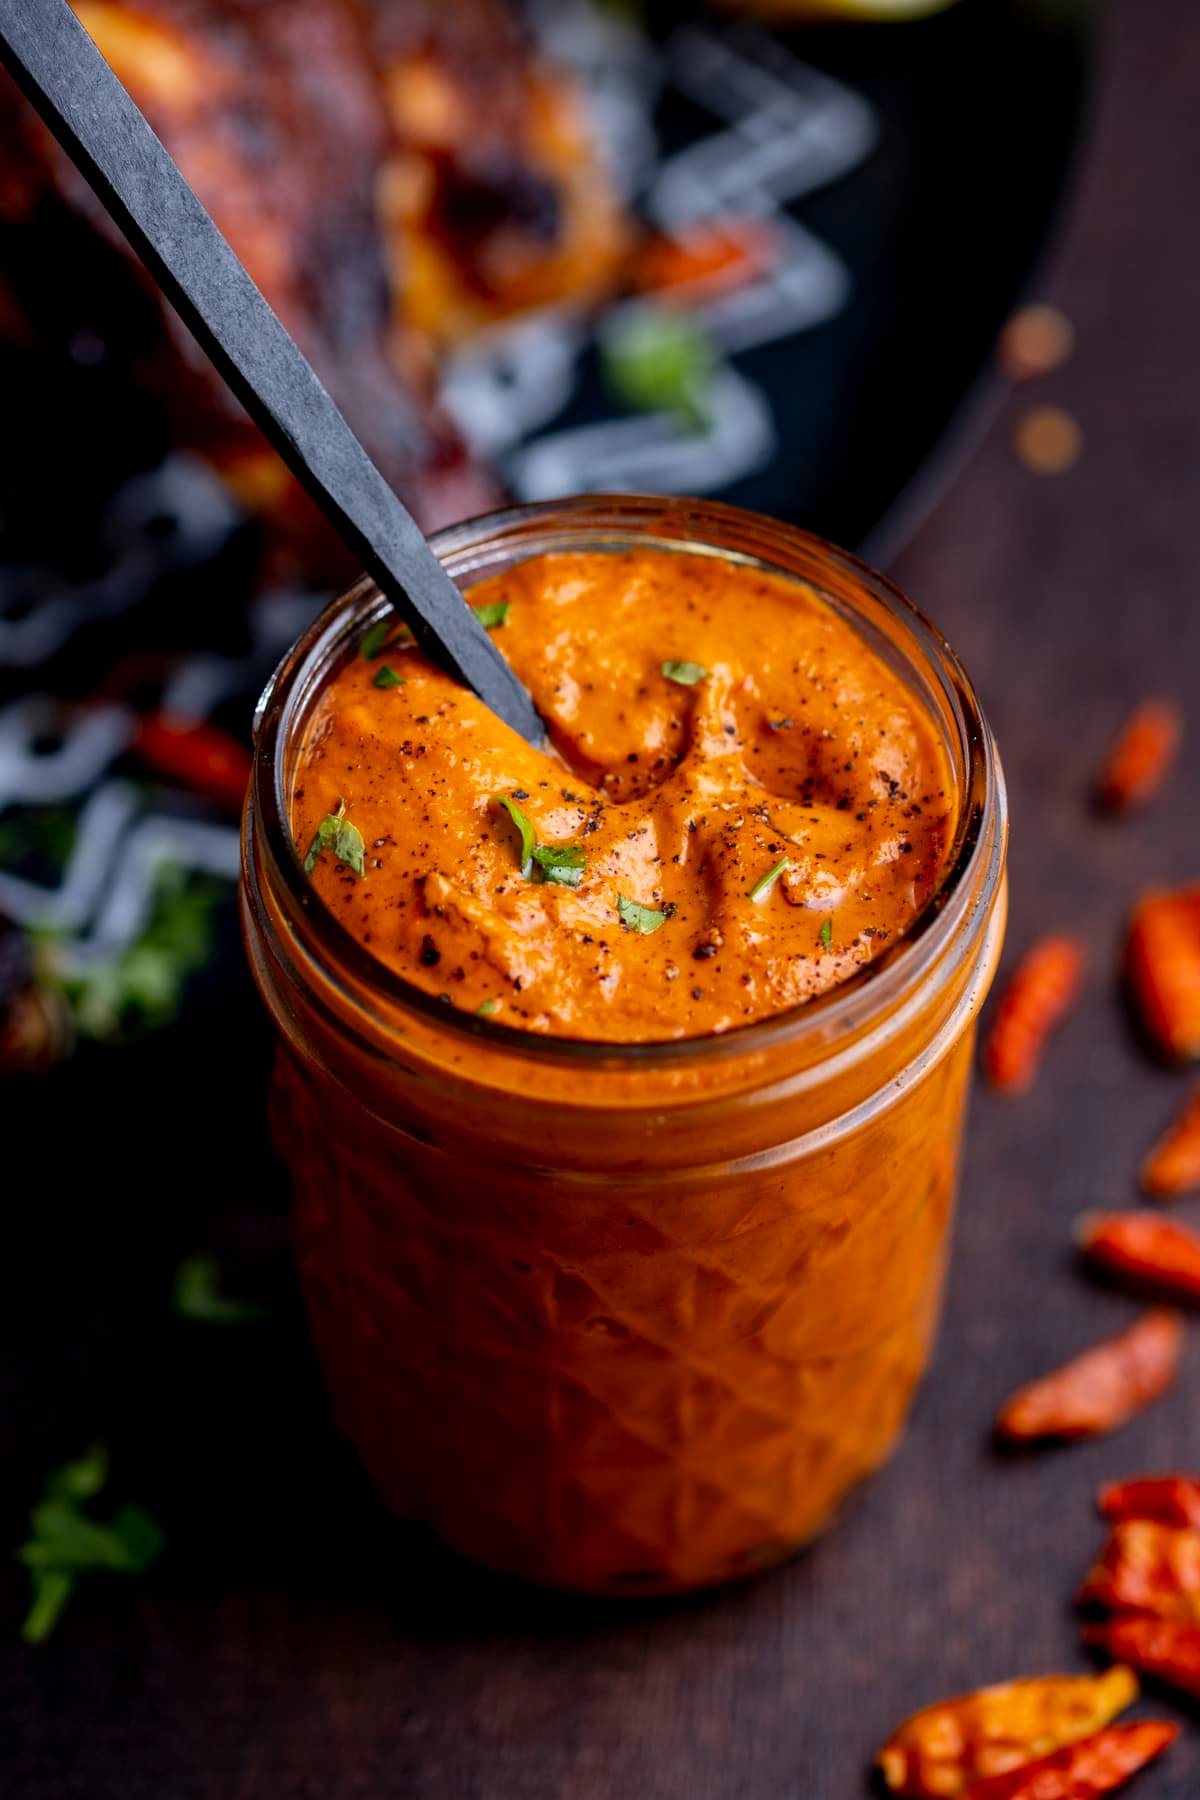 Homemade peri peri sauce in a glass jar with a black spoon sticking out of it.